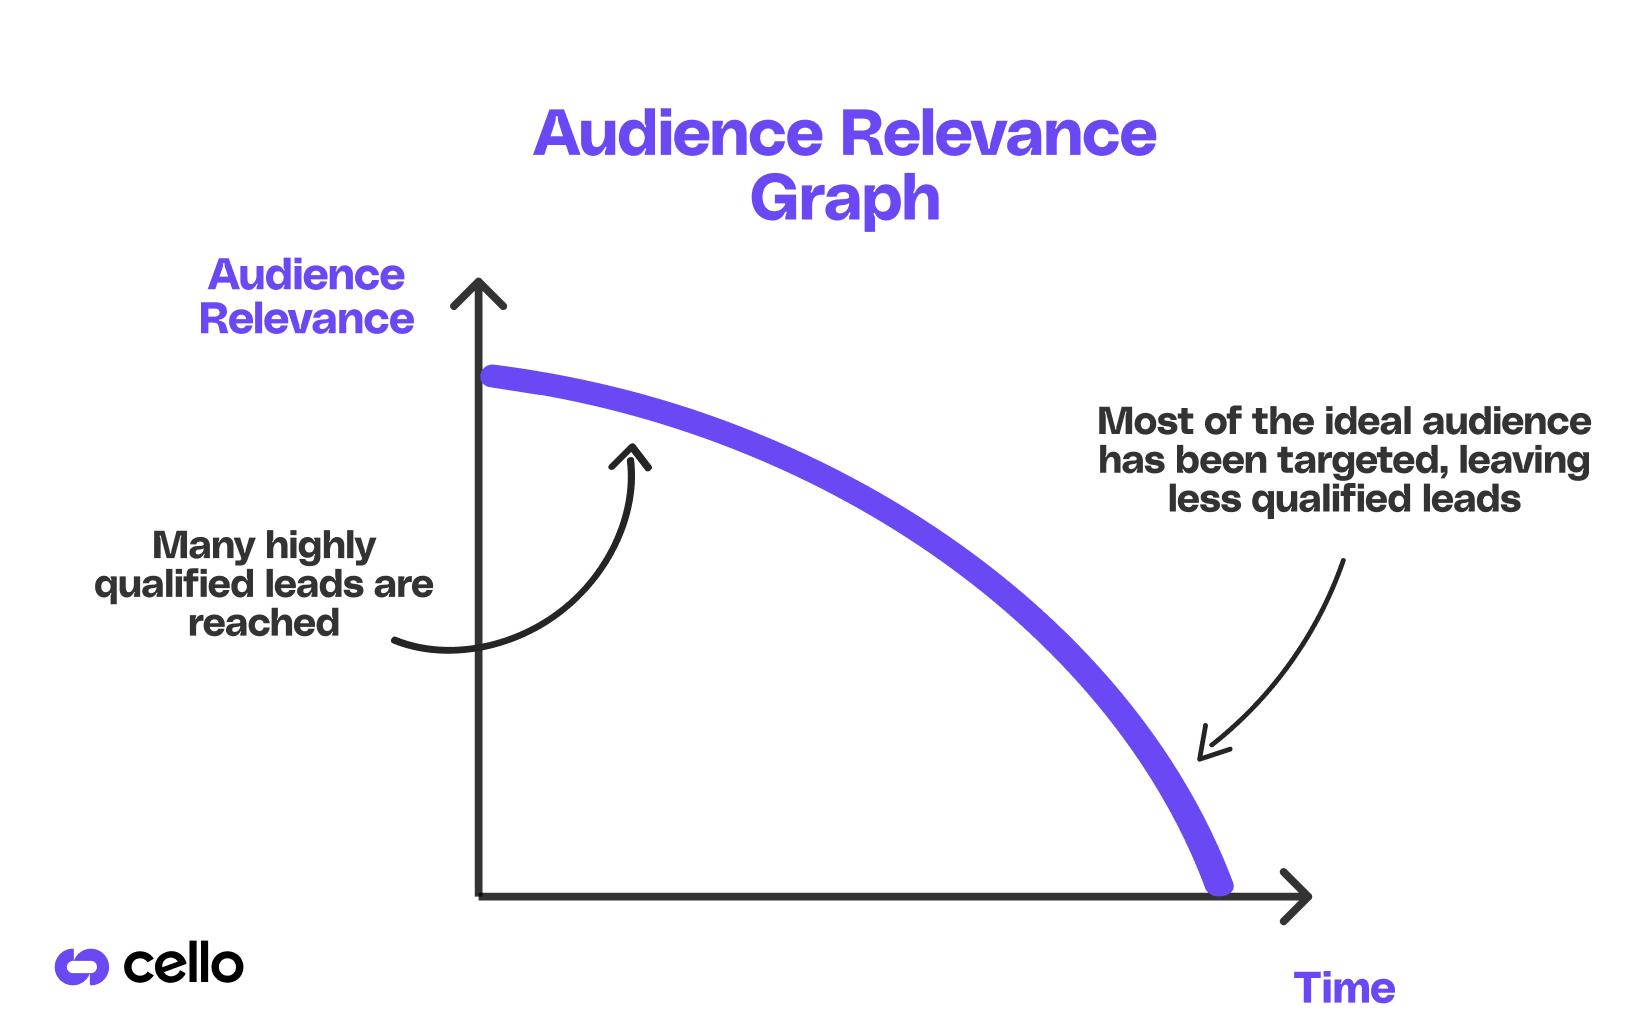 A graph showing how audience relevance changes over time for ad growth loops